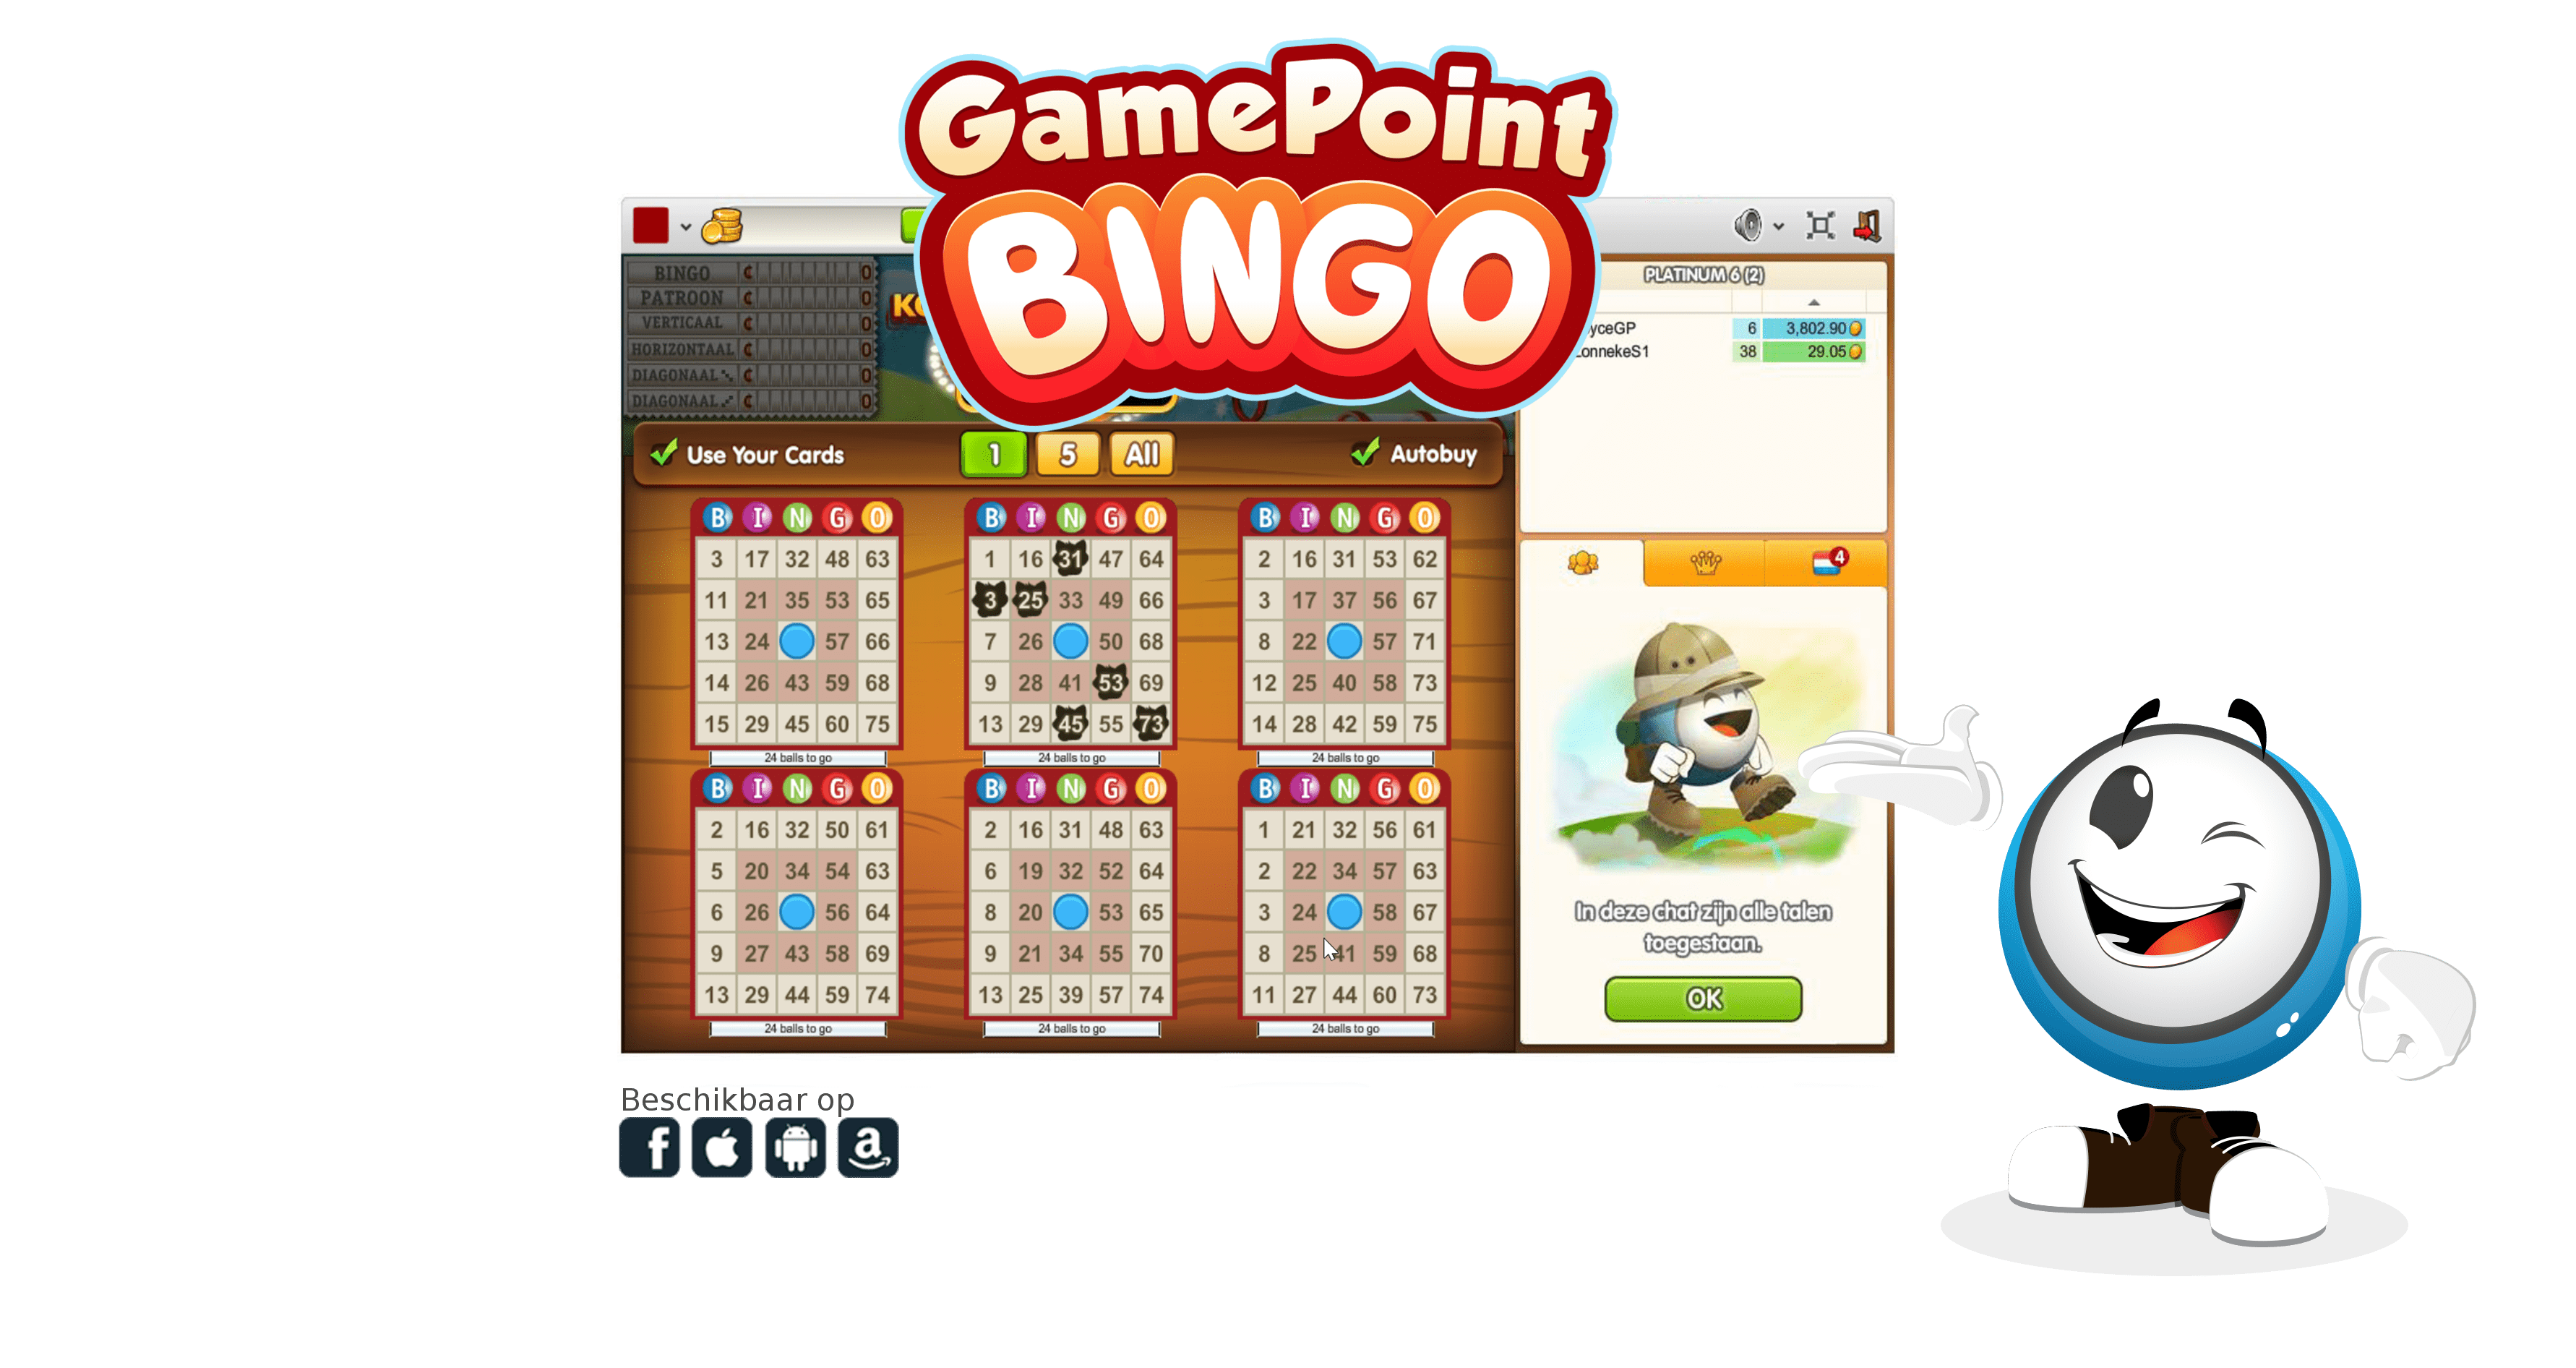 playing bingo online for real money